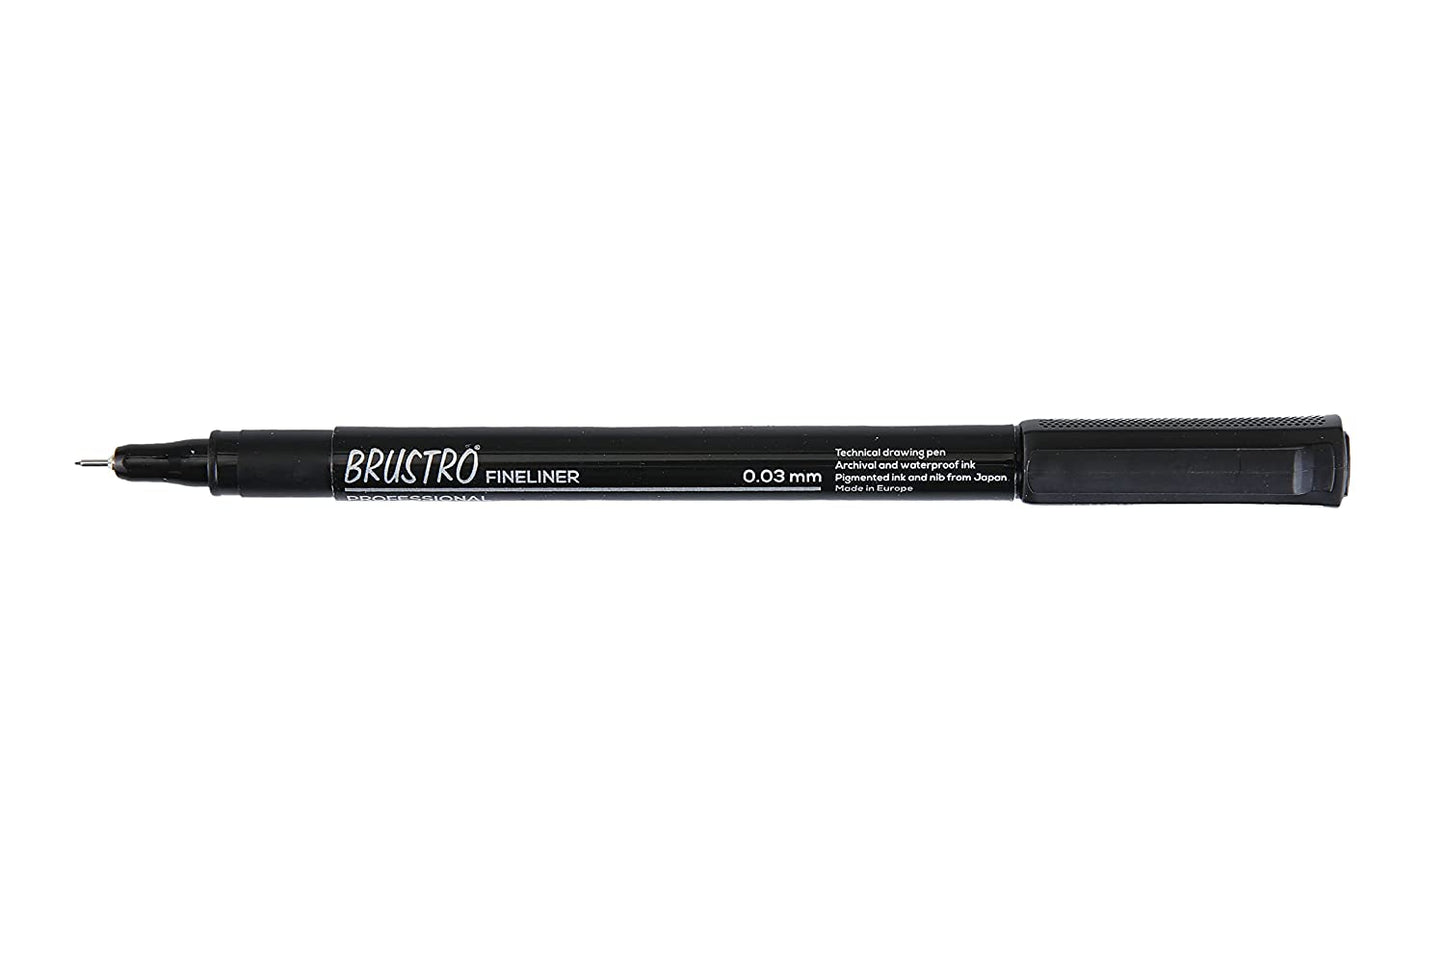 Brustro Professional Pigment Based Fineliner (tip Size of 0.03 mm, Black and Archival Waterproof UV Resistant Ink)